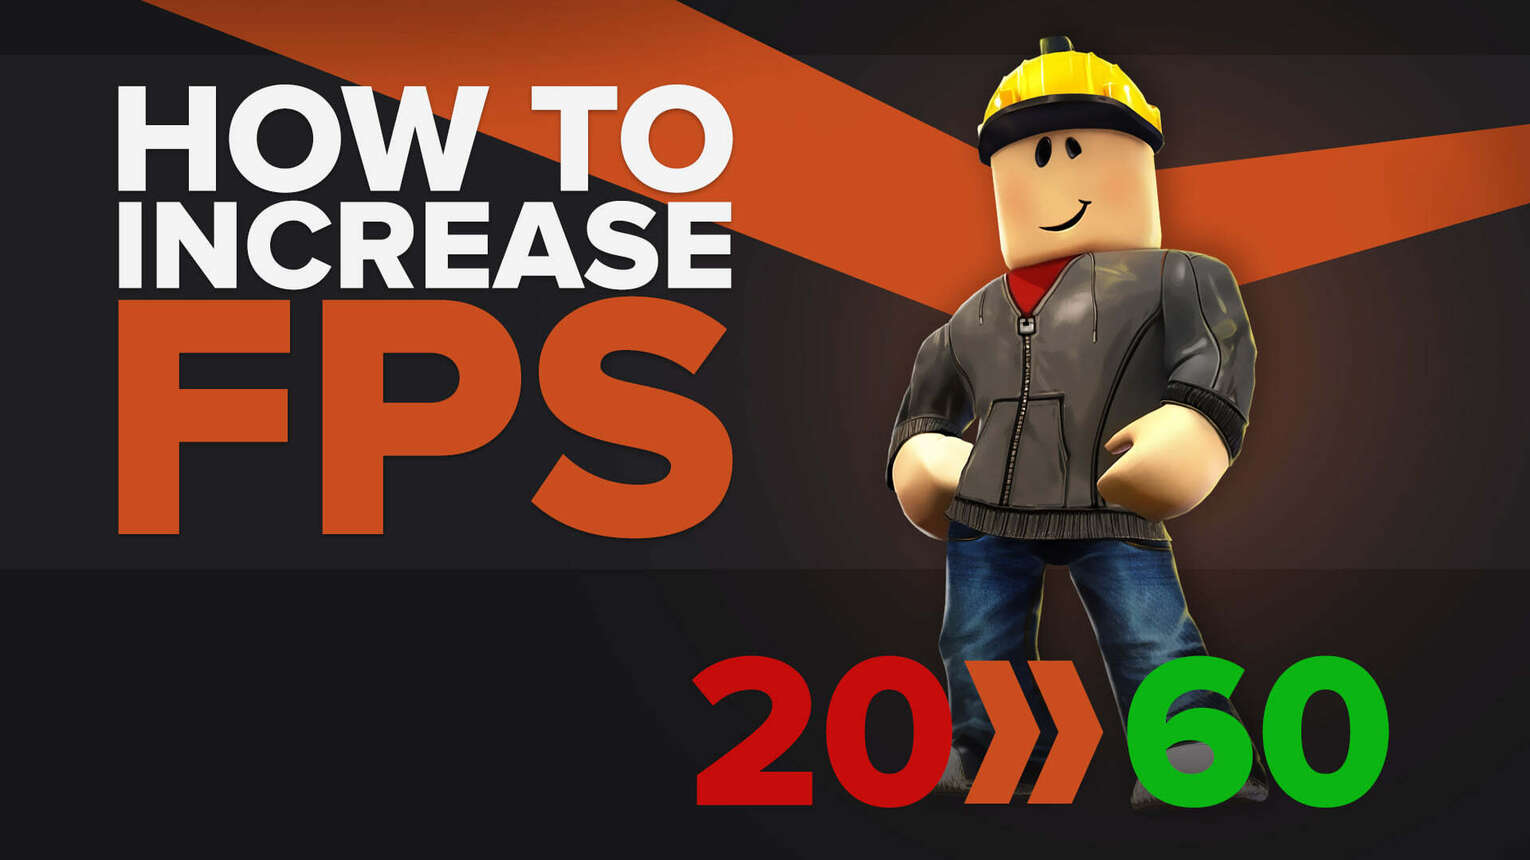 Roblox FPS - How To Increase Your Frame Rate